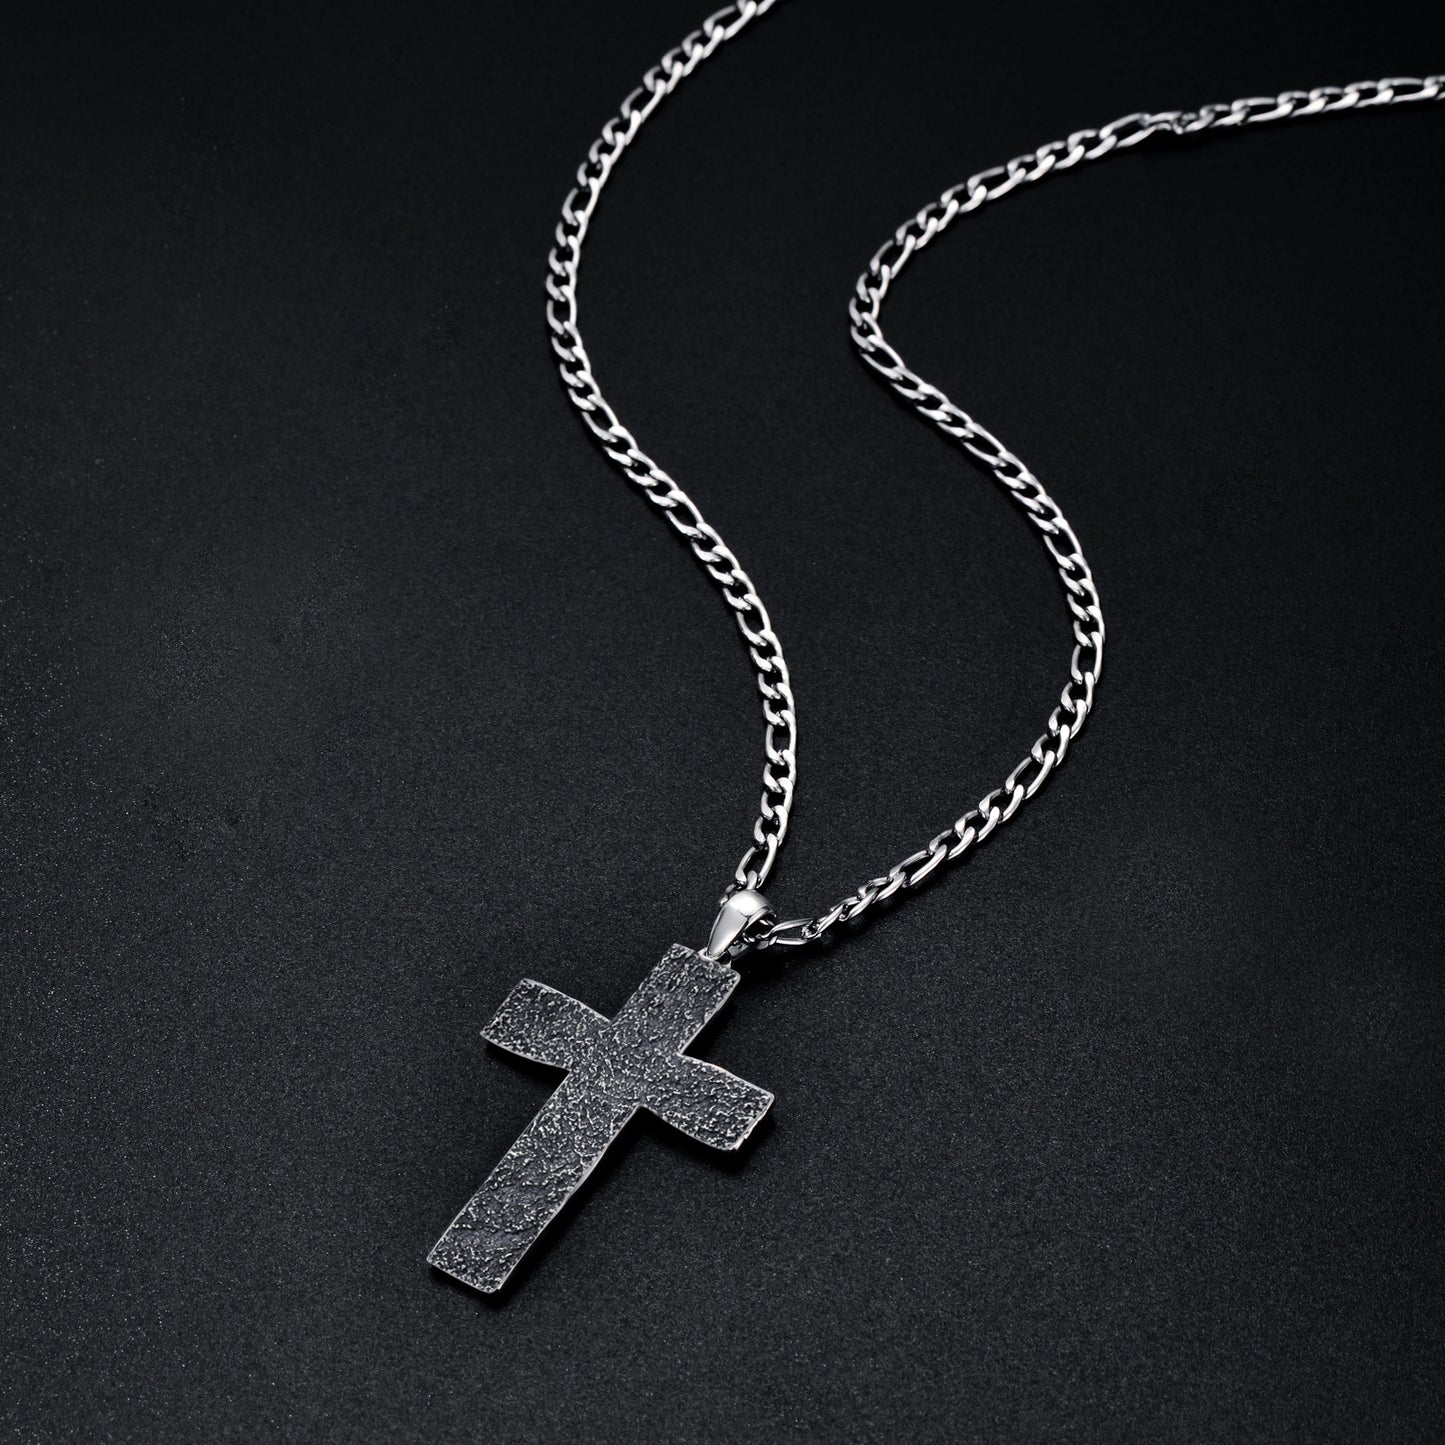 Silver Cross Pendant Necklace with Oxidized Chain